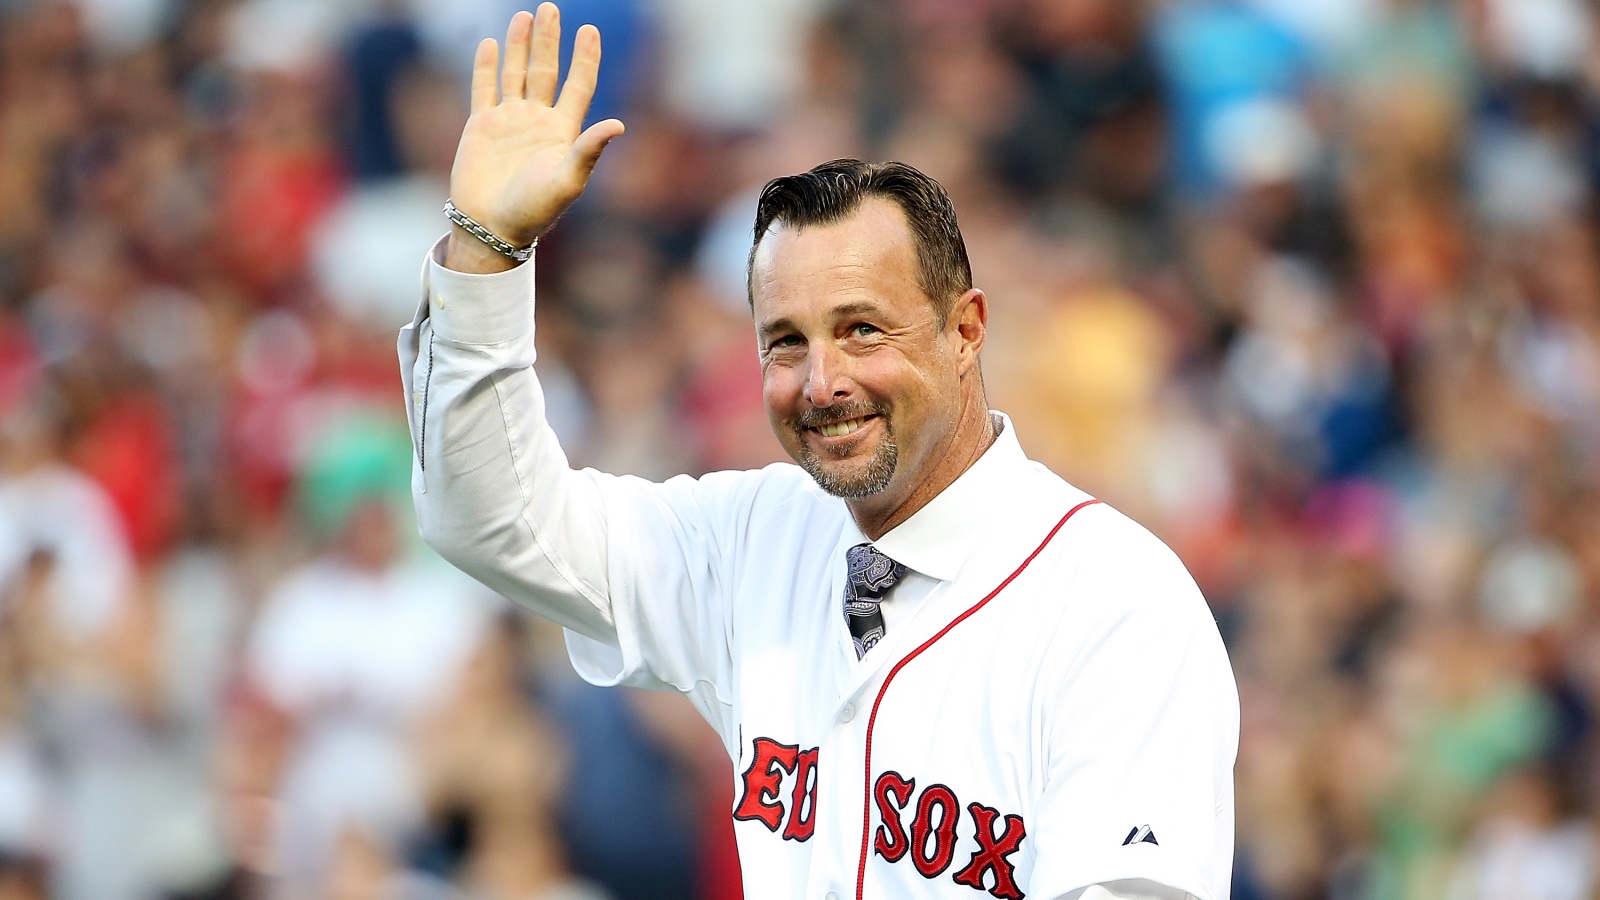 former Red Sox pitcher Tim Wakefield